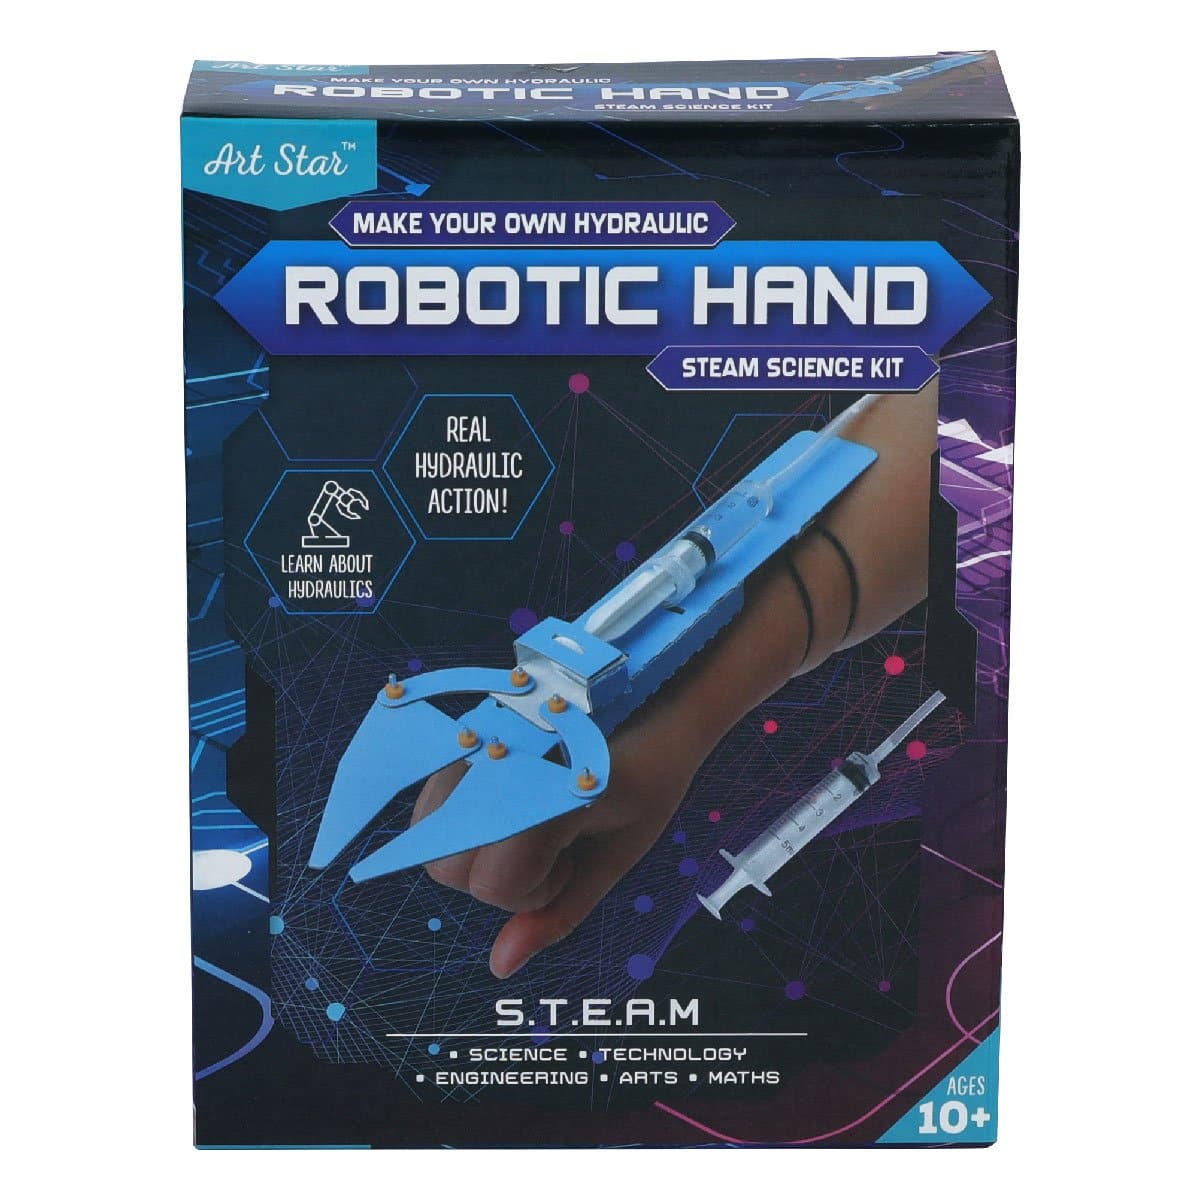 https://www.shopriot.shop/wp-content/uploads/1689/98/art-star-make-your-own-hydraulic-robotic-hand-steam-science-kit-941-shop-for-the-best-choice-on-the-internet_0.png